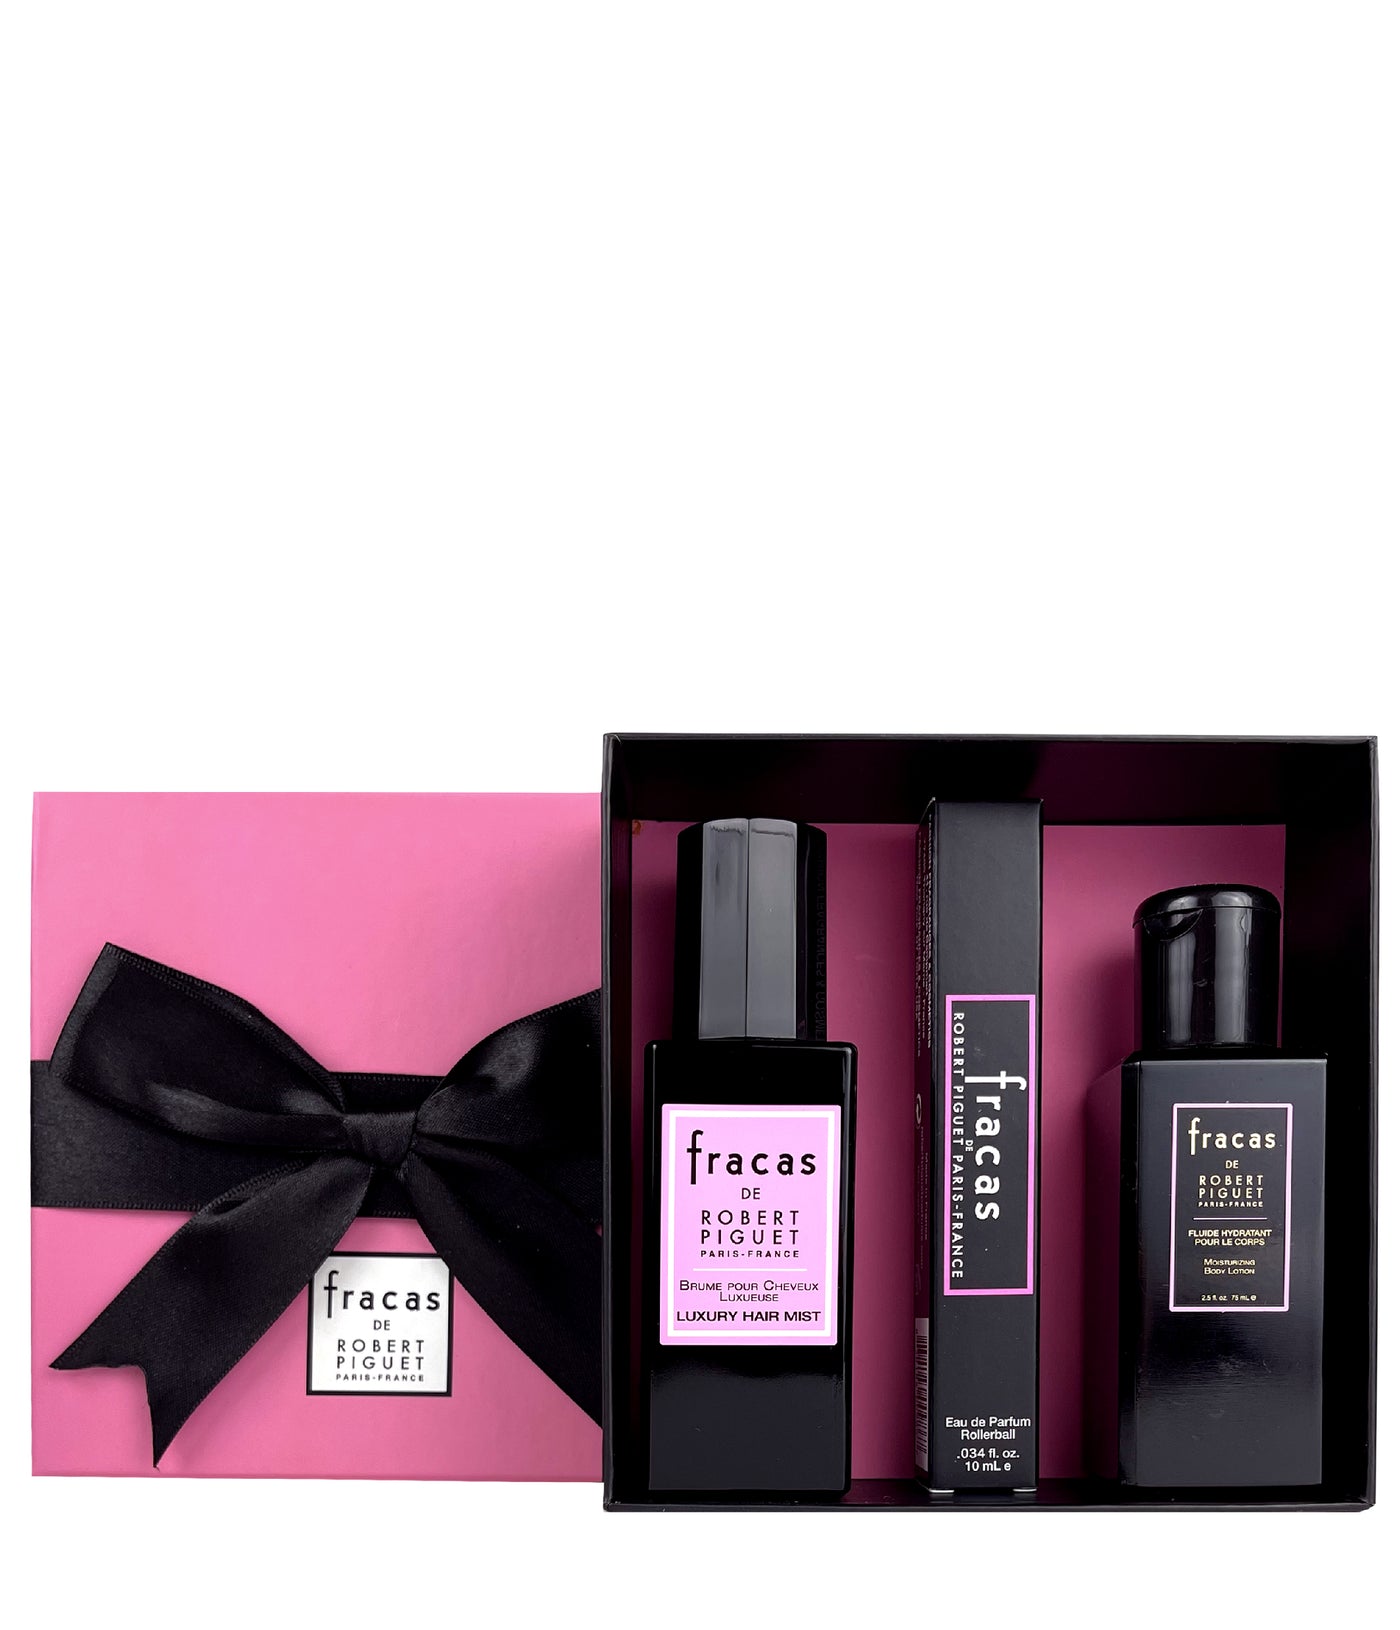 Limited Edition Fracas Gift Set